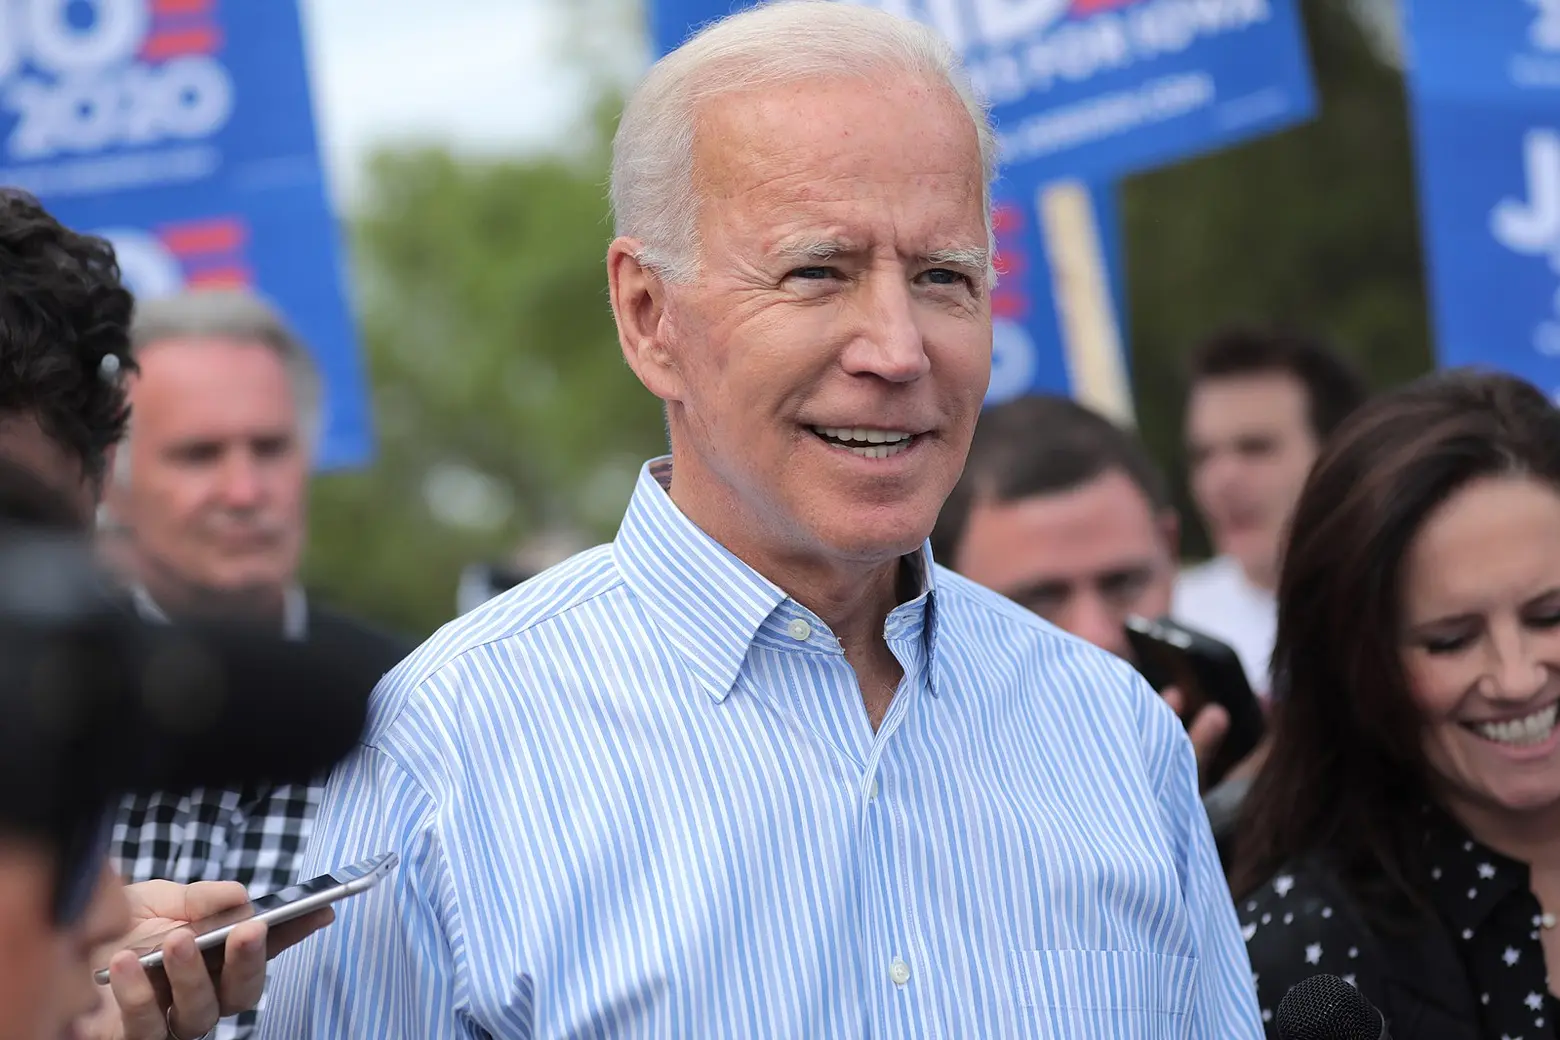 Here’s what New Yorkers can expect from Joe Biden’s COVID-19 plan